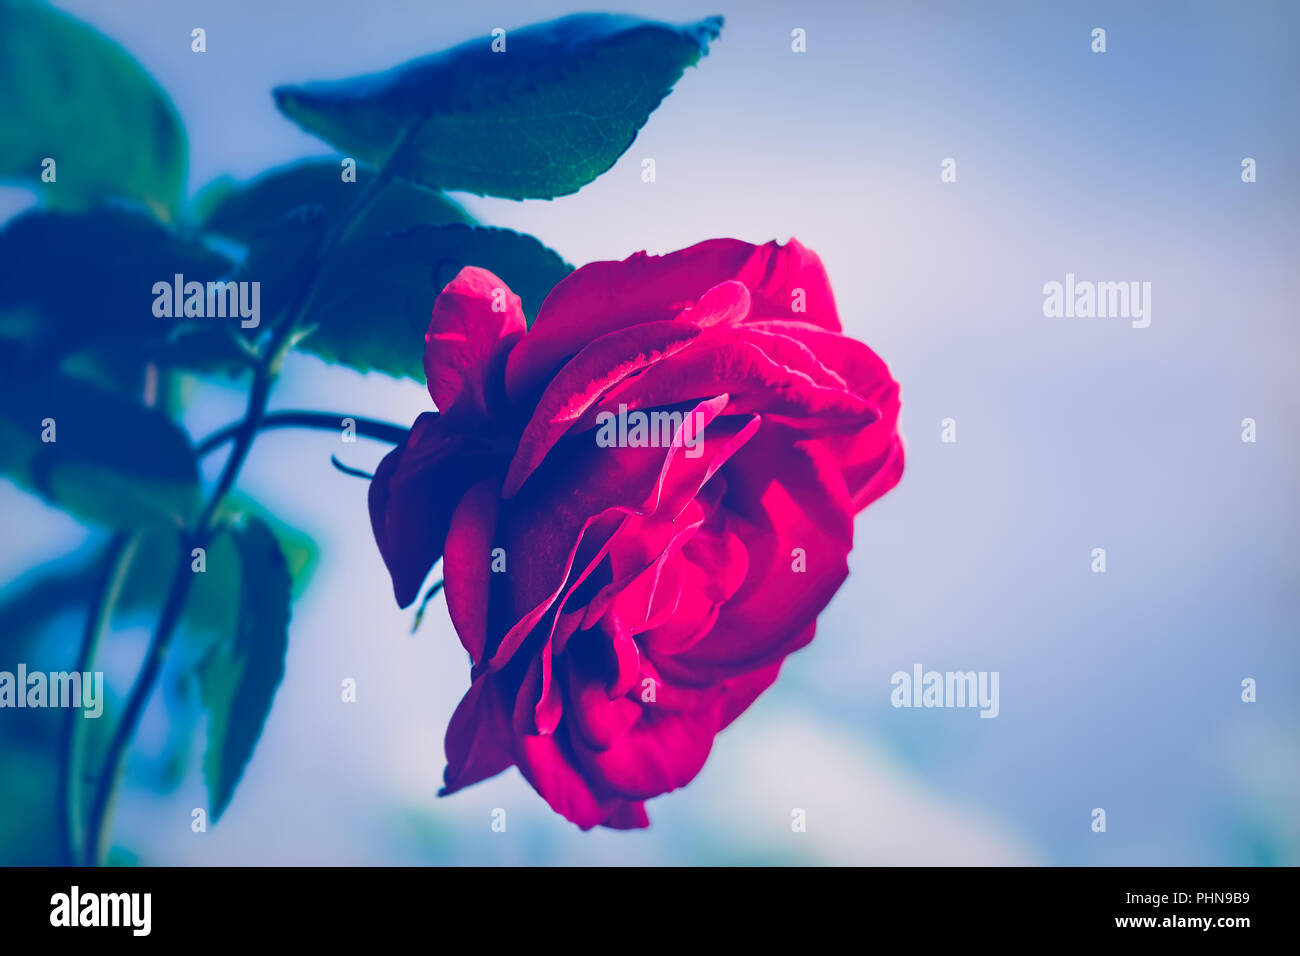 Romantic red rose on blue background Stock Photo